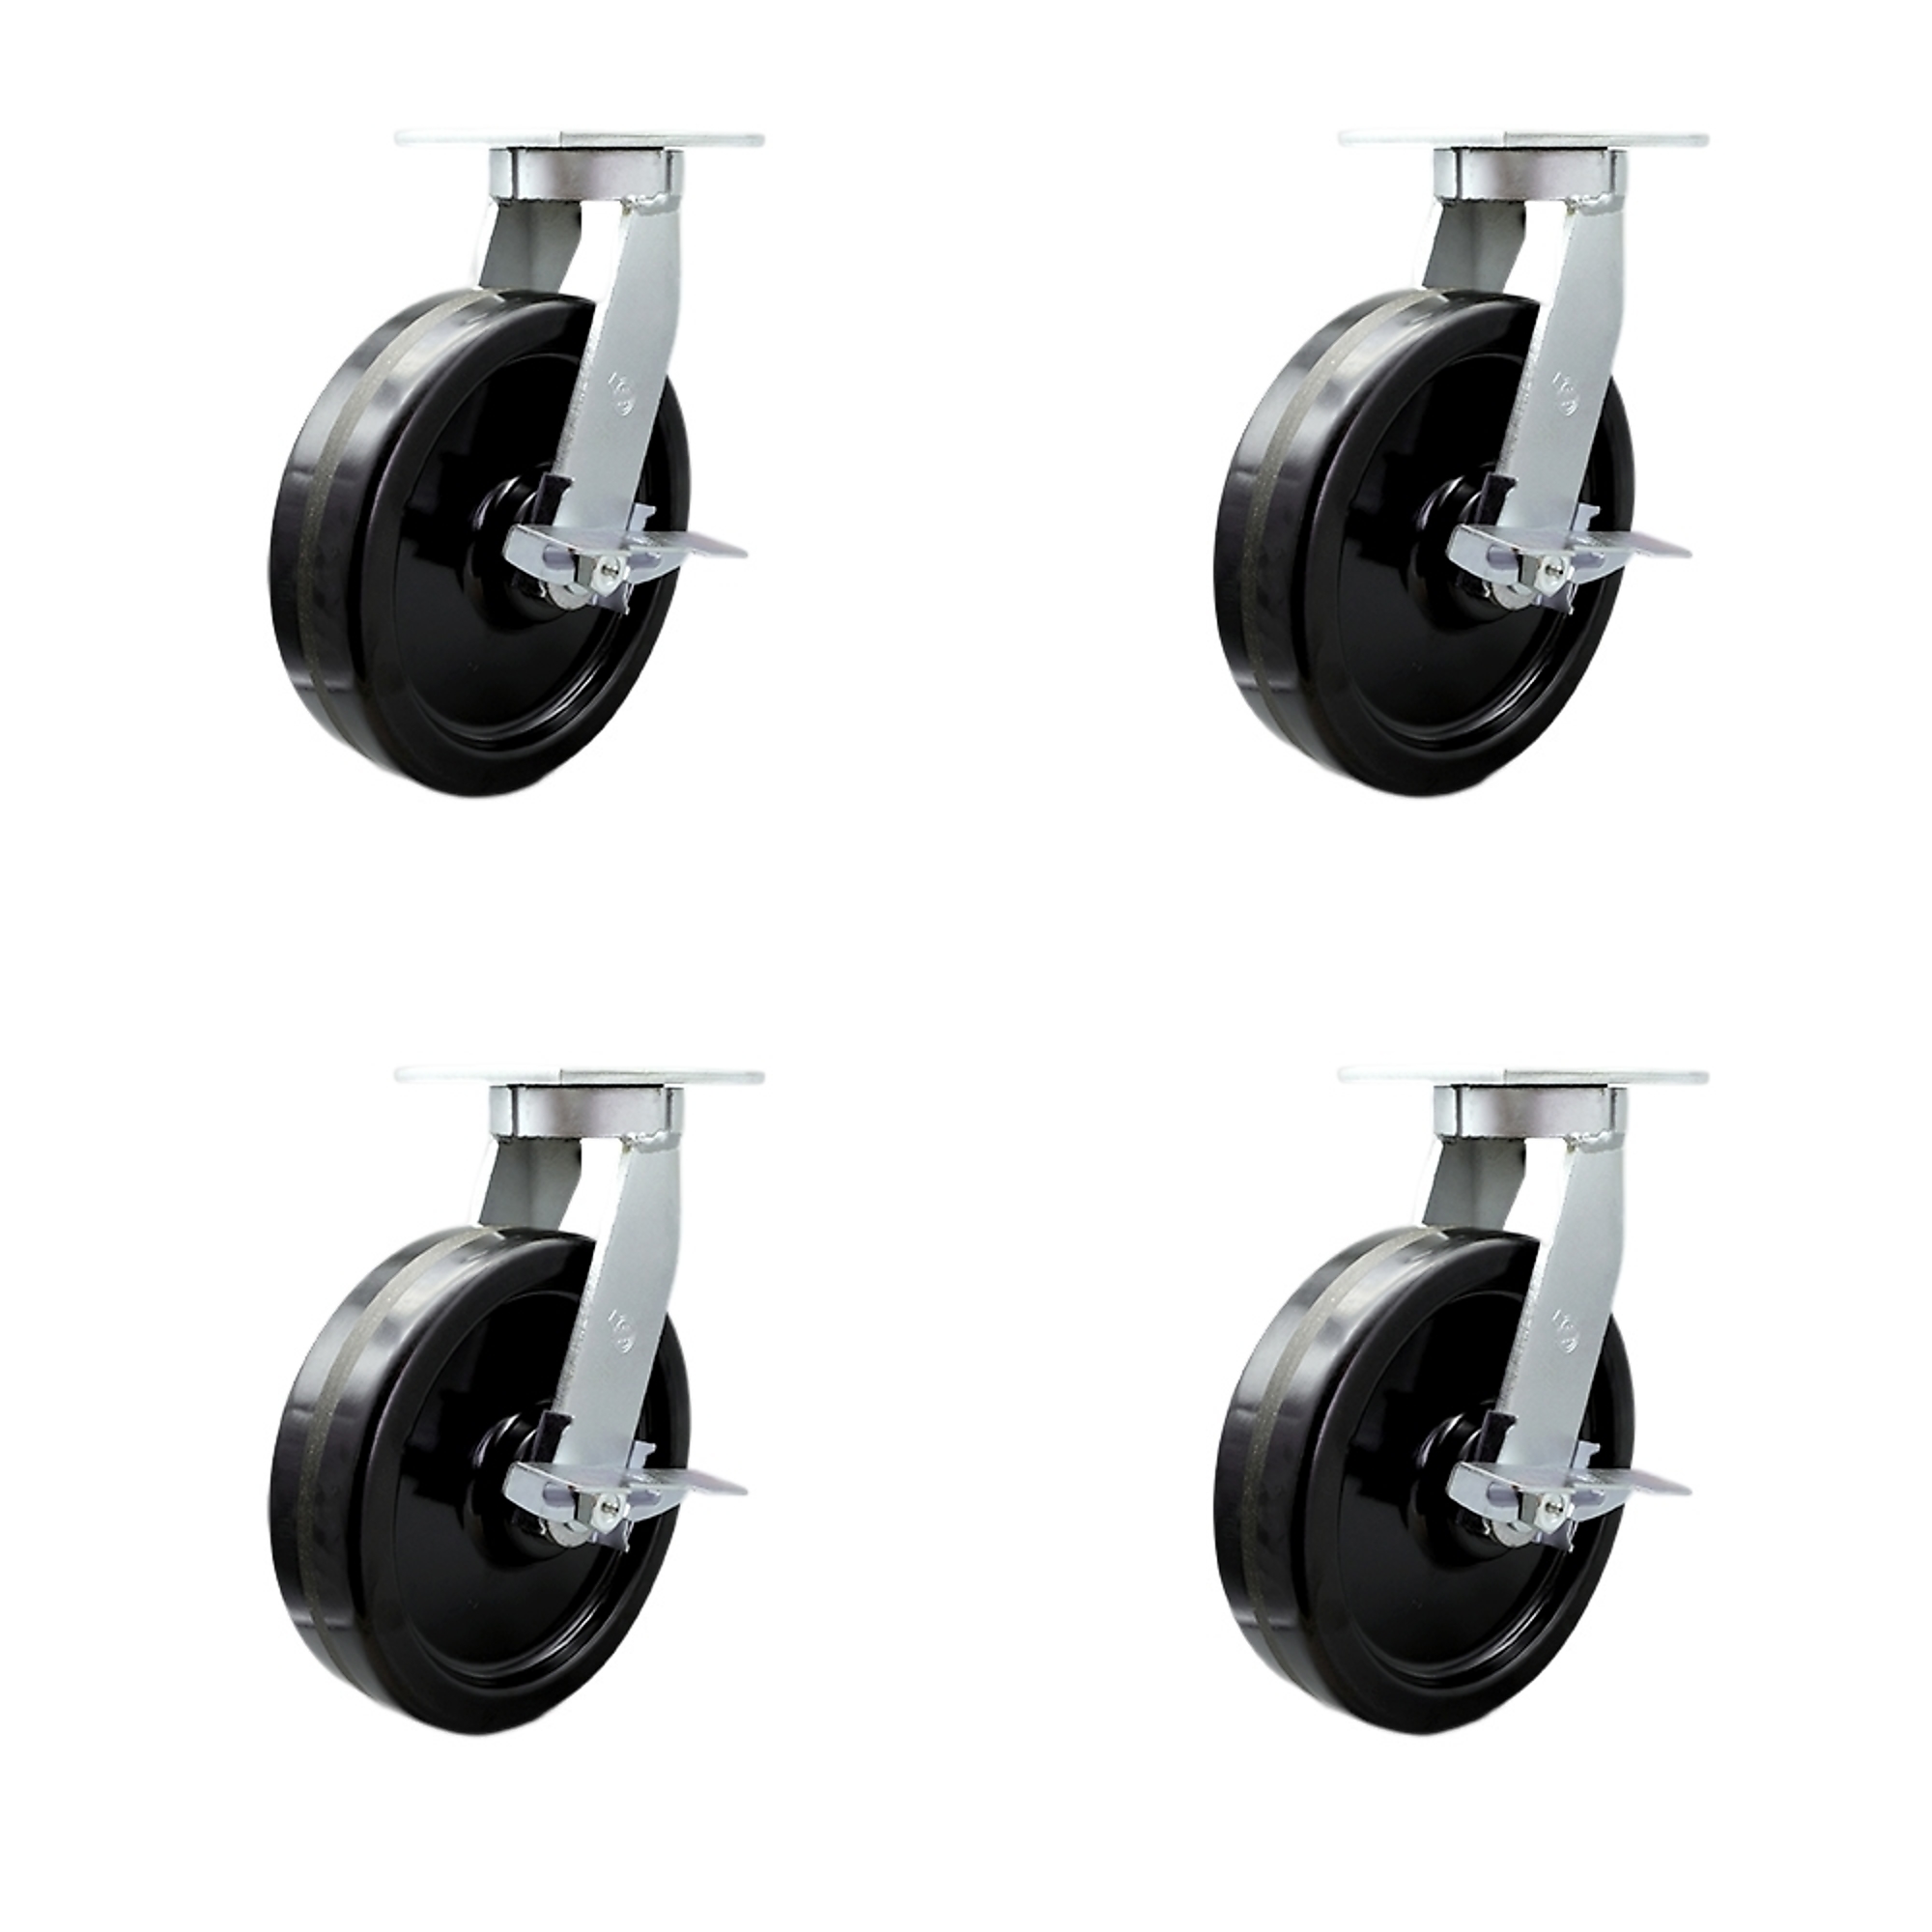 Service Caster, 10Inch x 3Inch Plate Casters, Wheel Diameter 10 in, Caster Type Swivel, Package (qty.) 4, Model SCC-KP92S1030-PHR-SLB-BSL-2-SLB-2